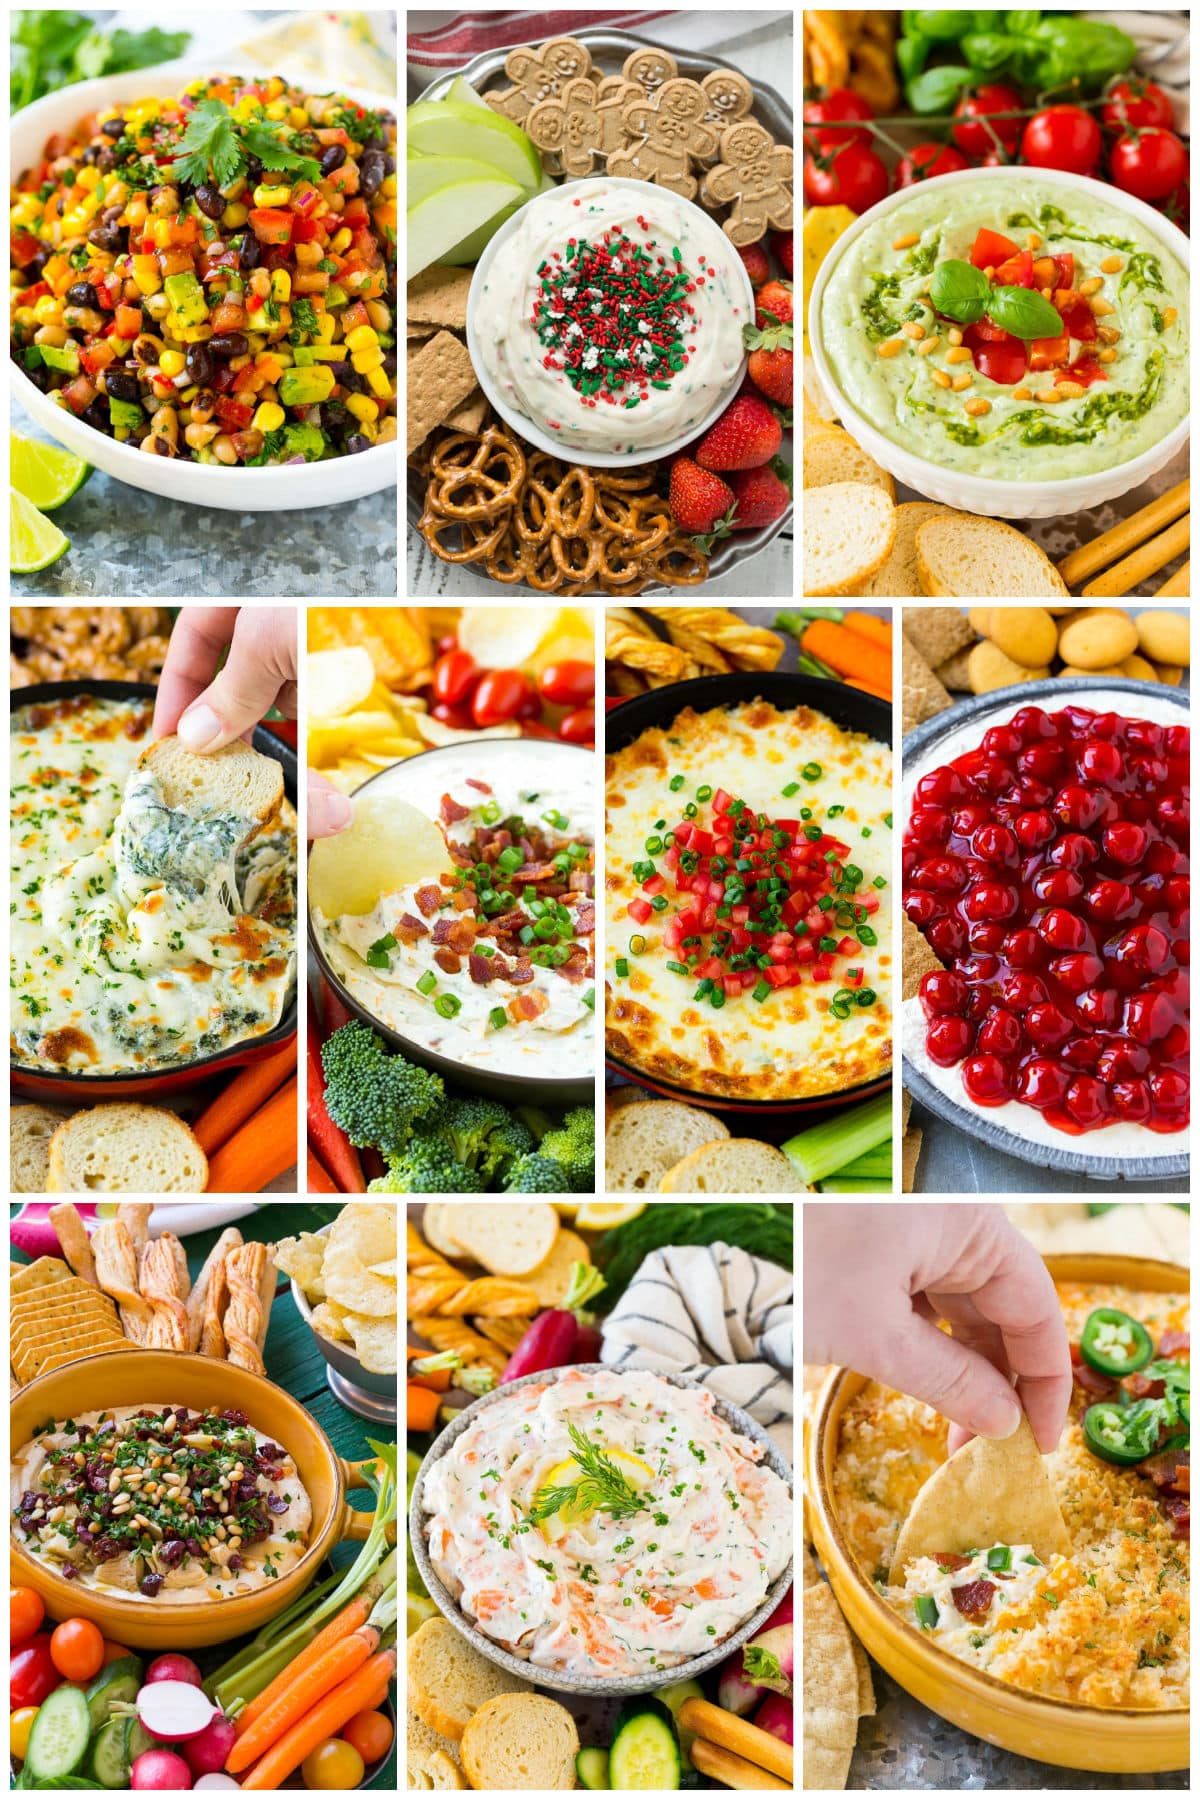 Several images of holiday dips including cherry cheesecake dip, smoked salmon dip and spinach dip.